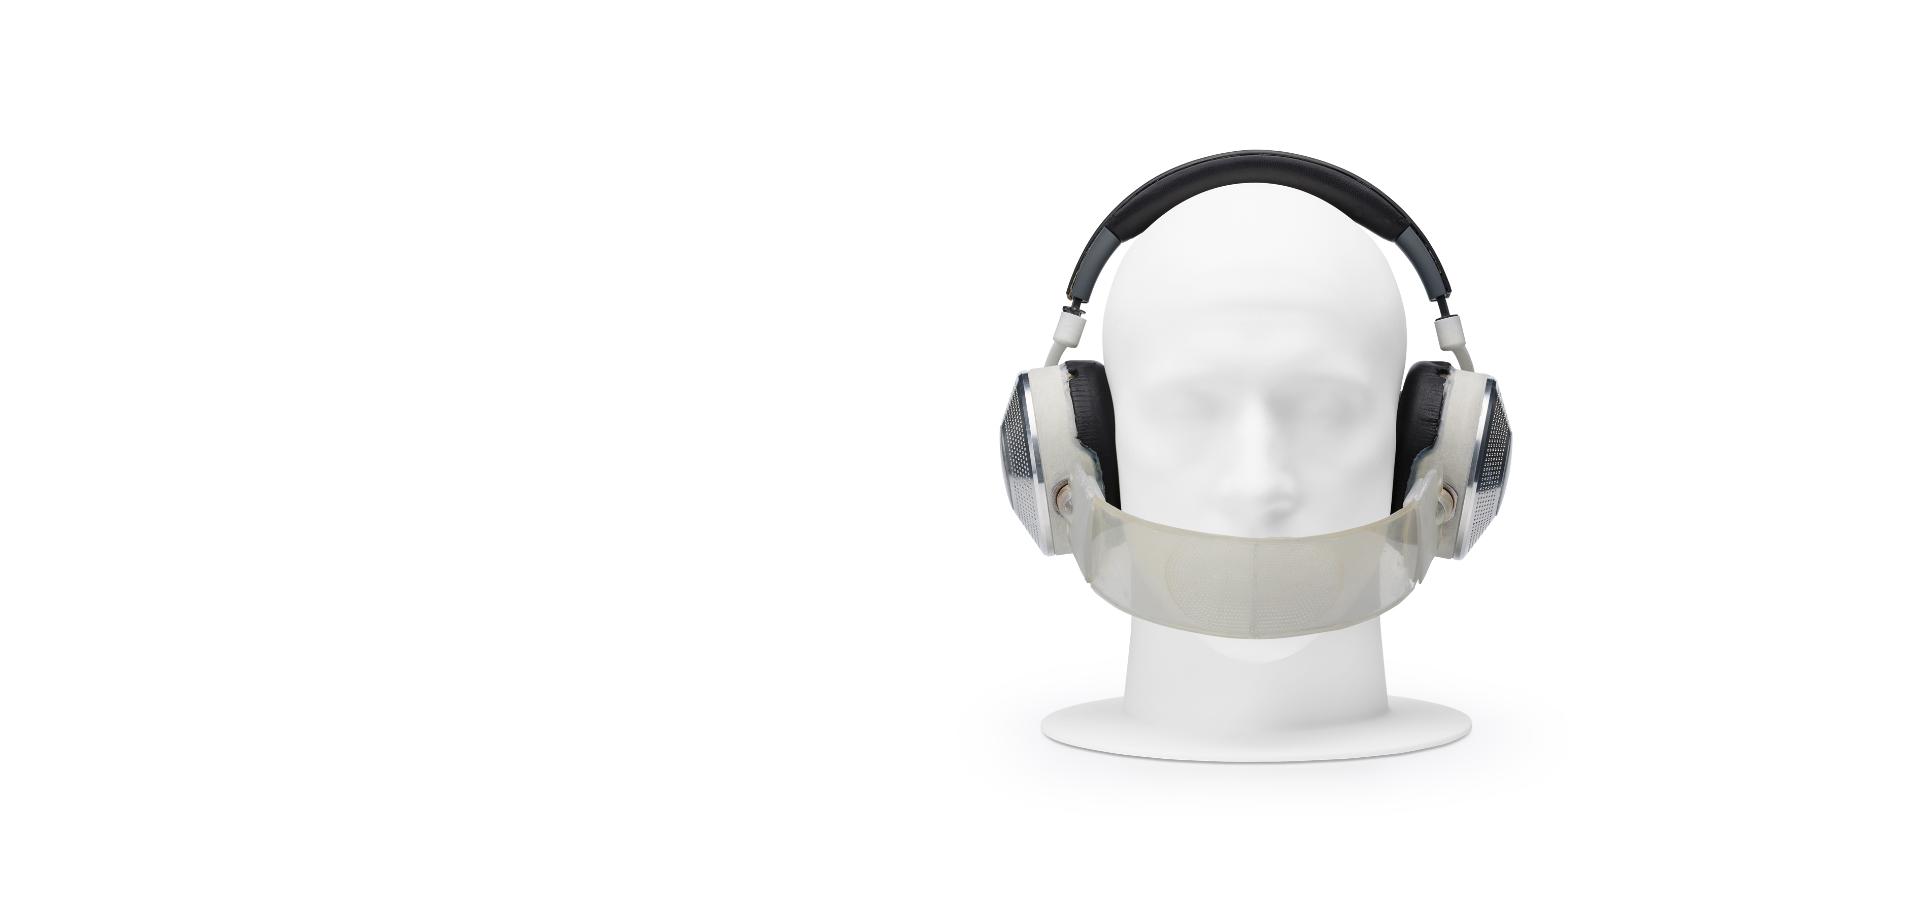 Manikin head wearing prototype headphones, with band across nose and mouth